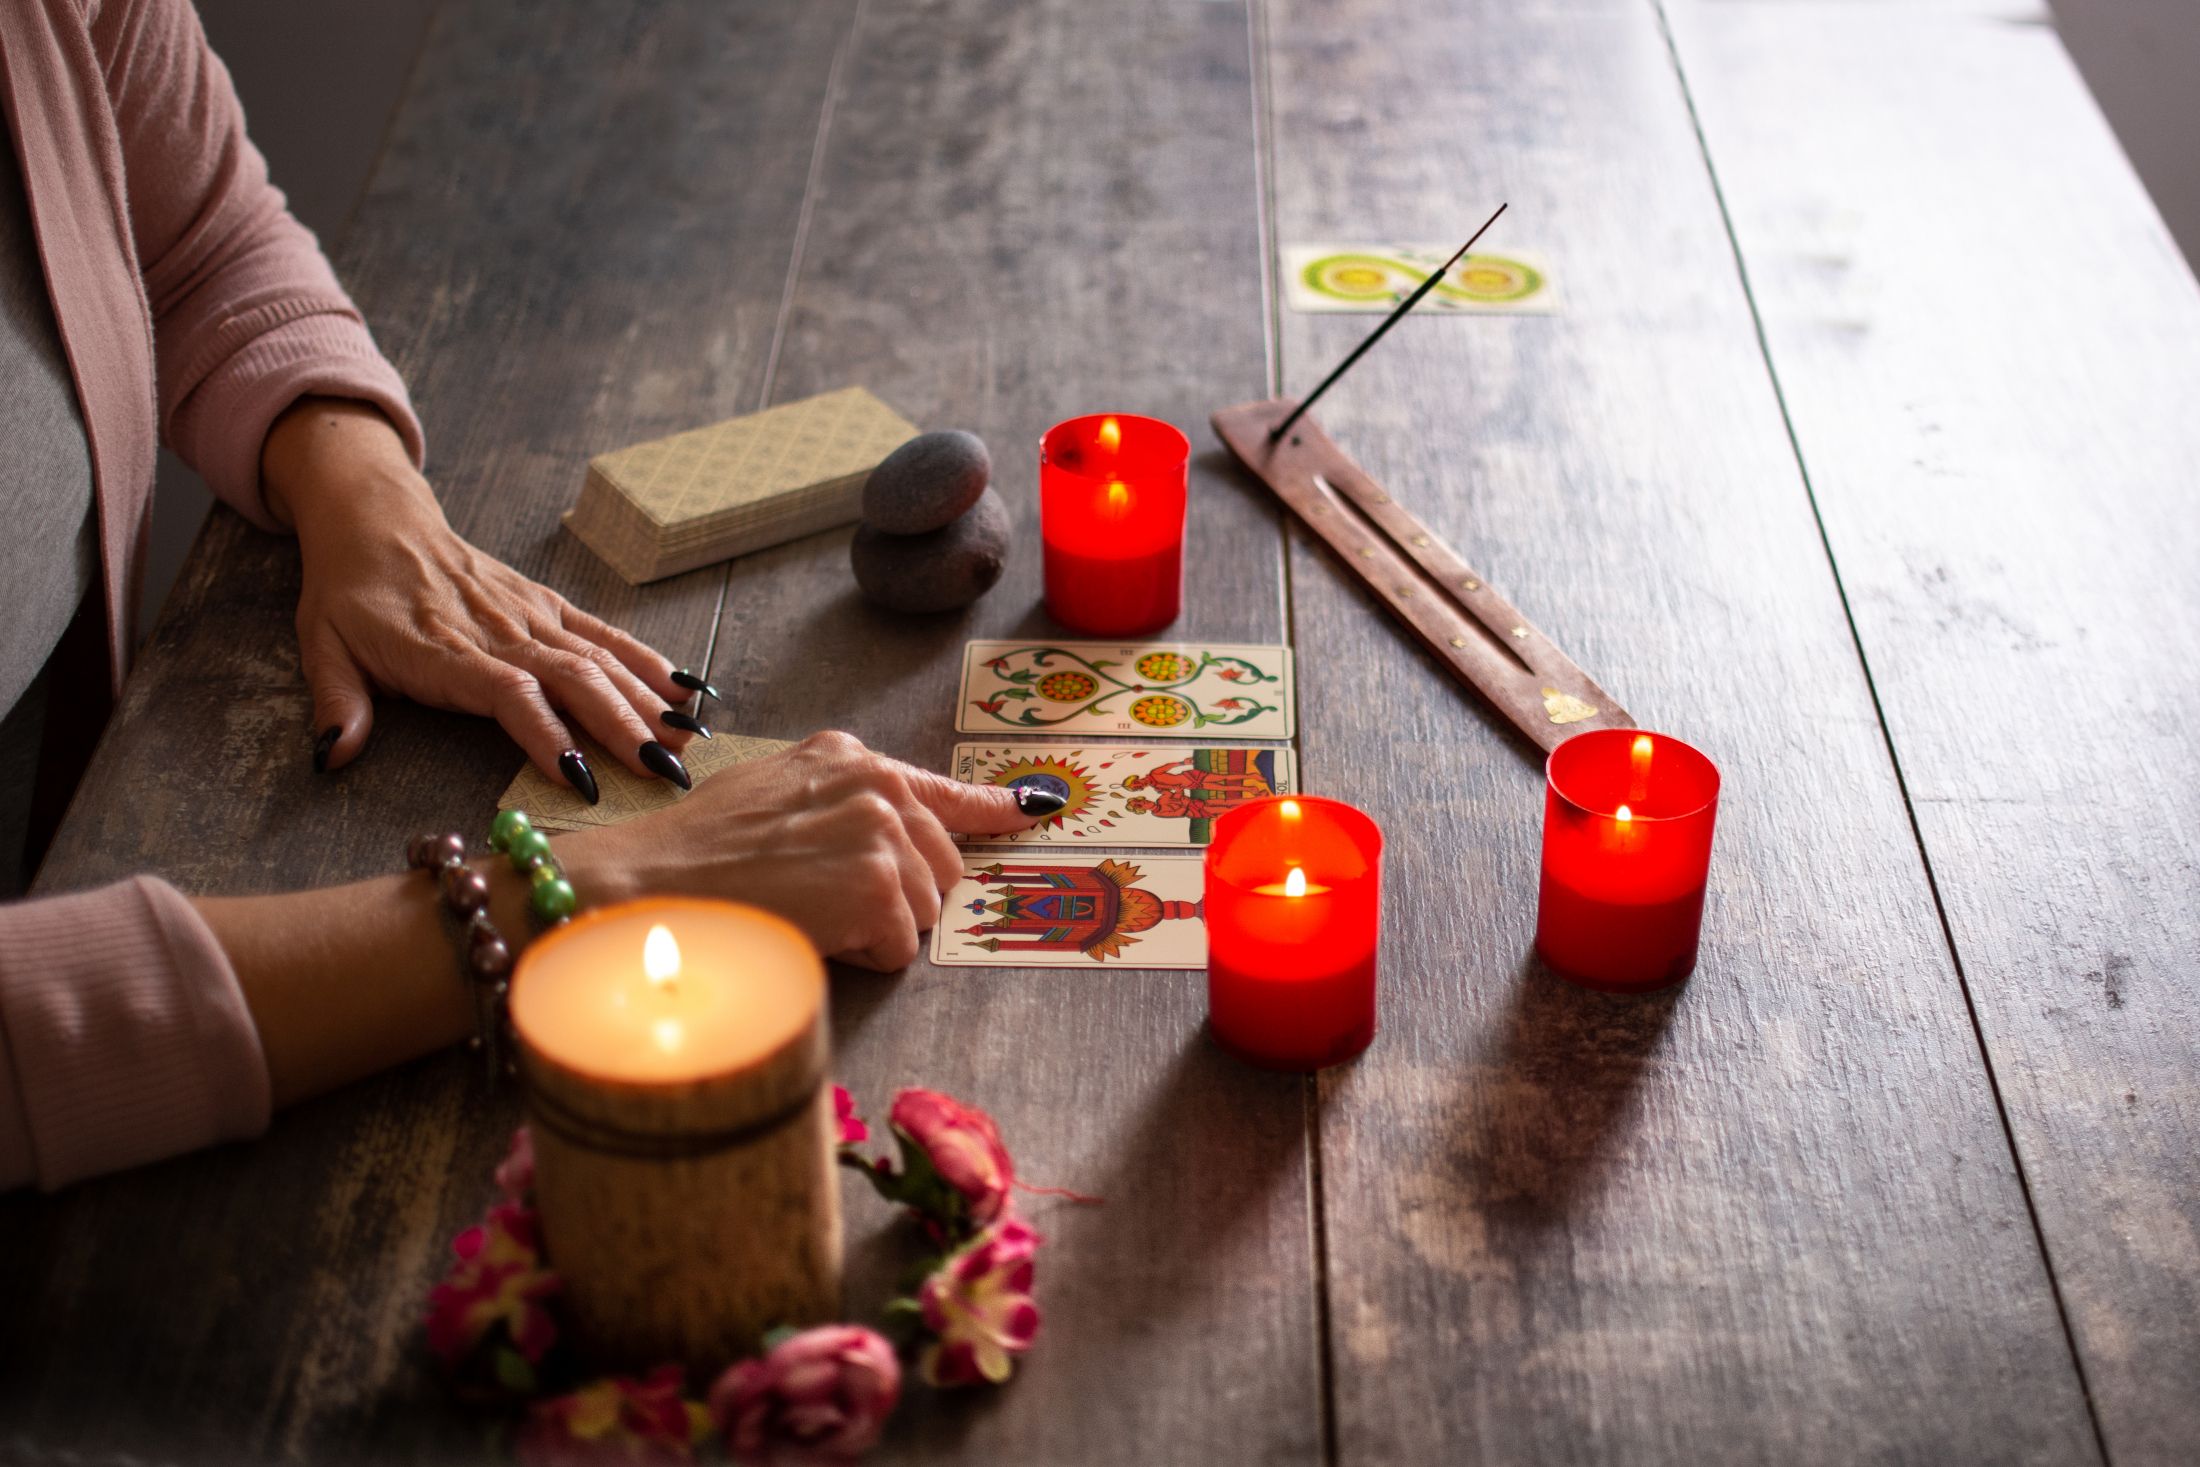 fortune-teller-reading-a-future-by-tarot-cards-on-rustic-table.jpg